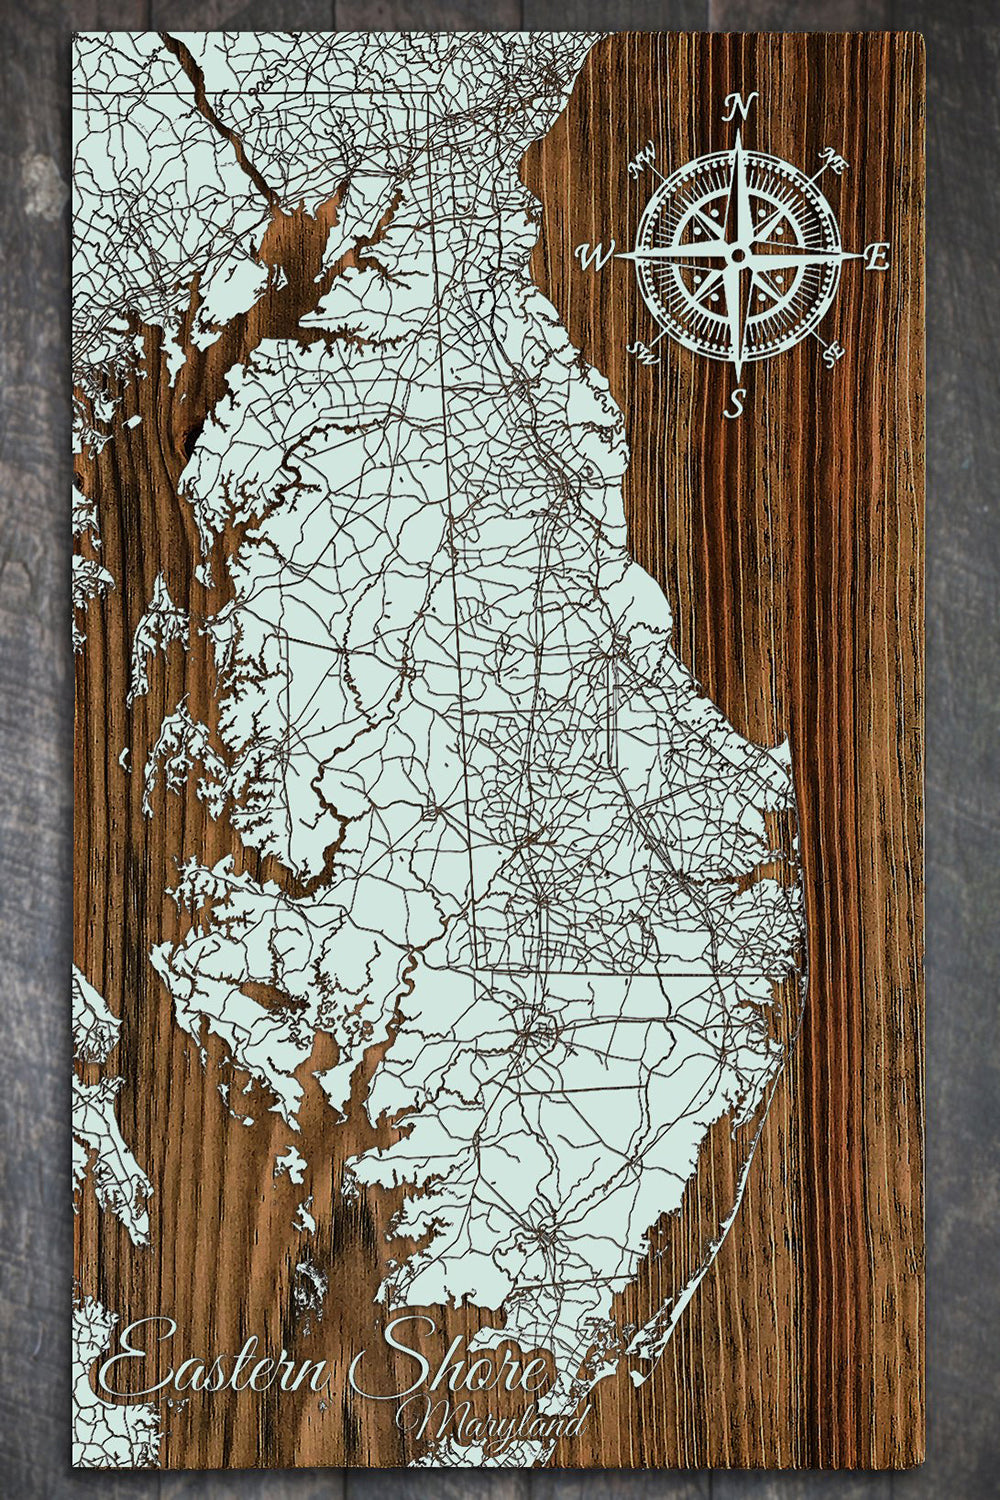 FP Wooden Map - Eastern Shore (Seaglass)